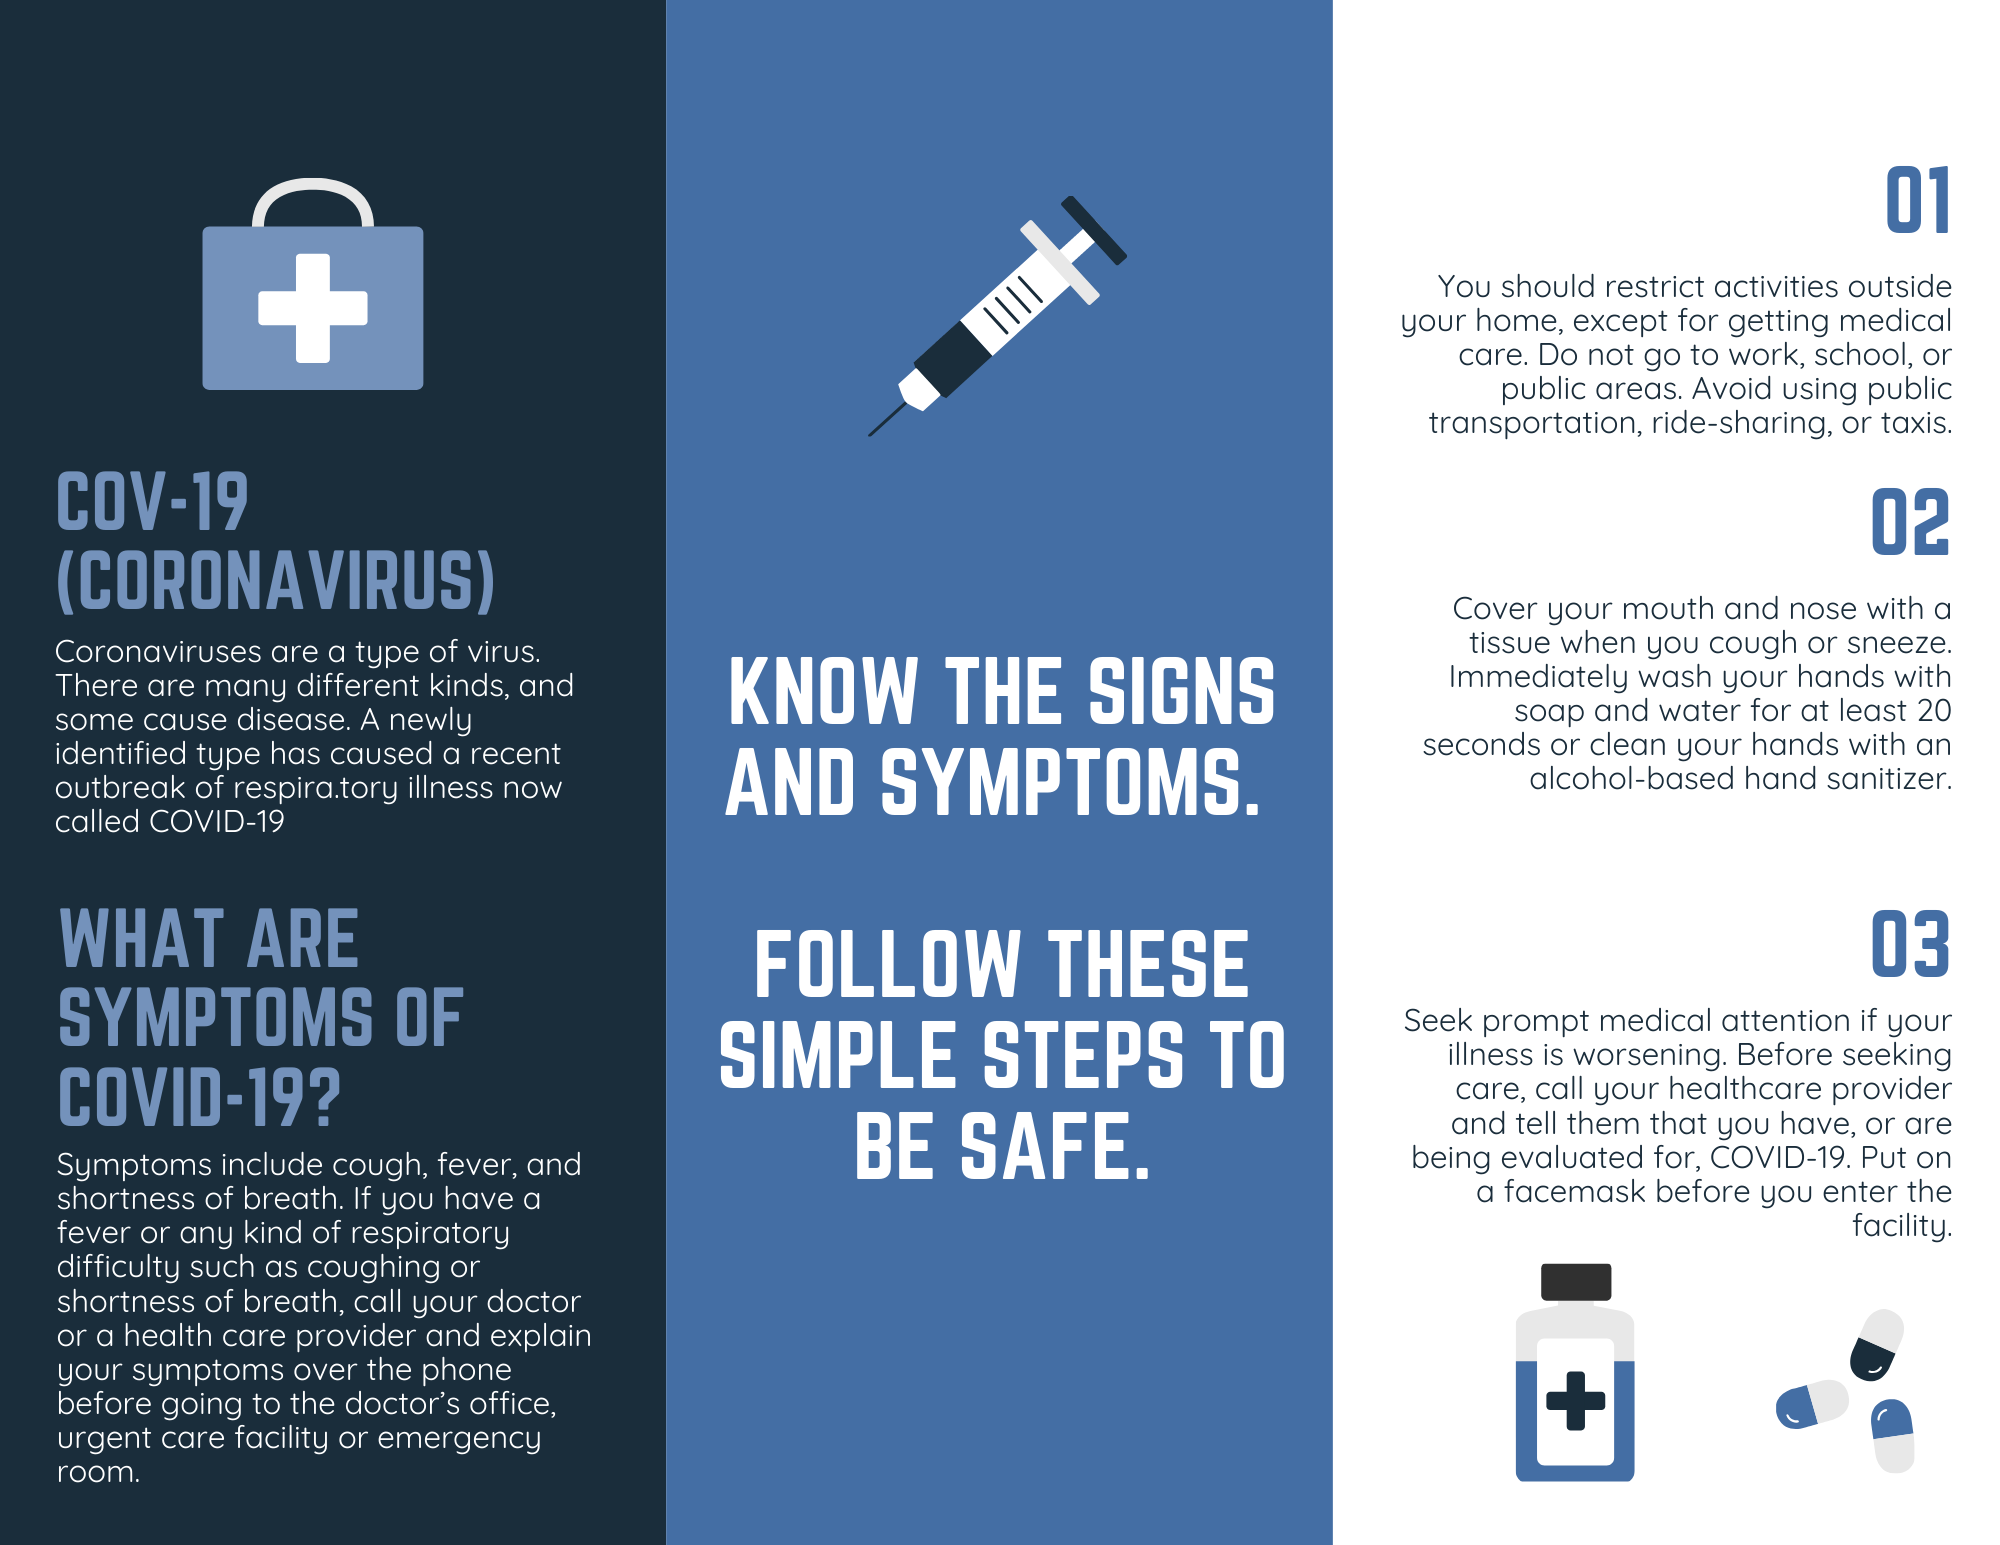 Coronavirus Safety Tips For Our Community